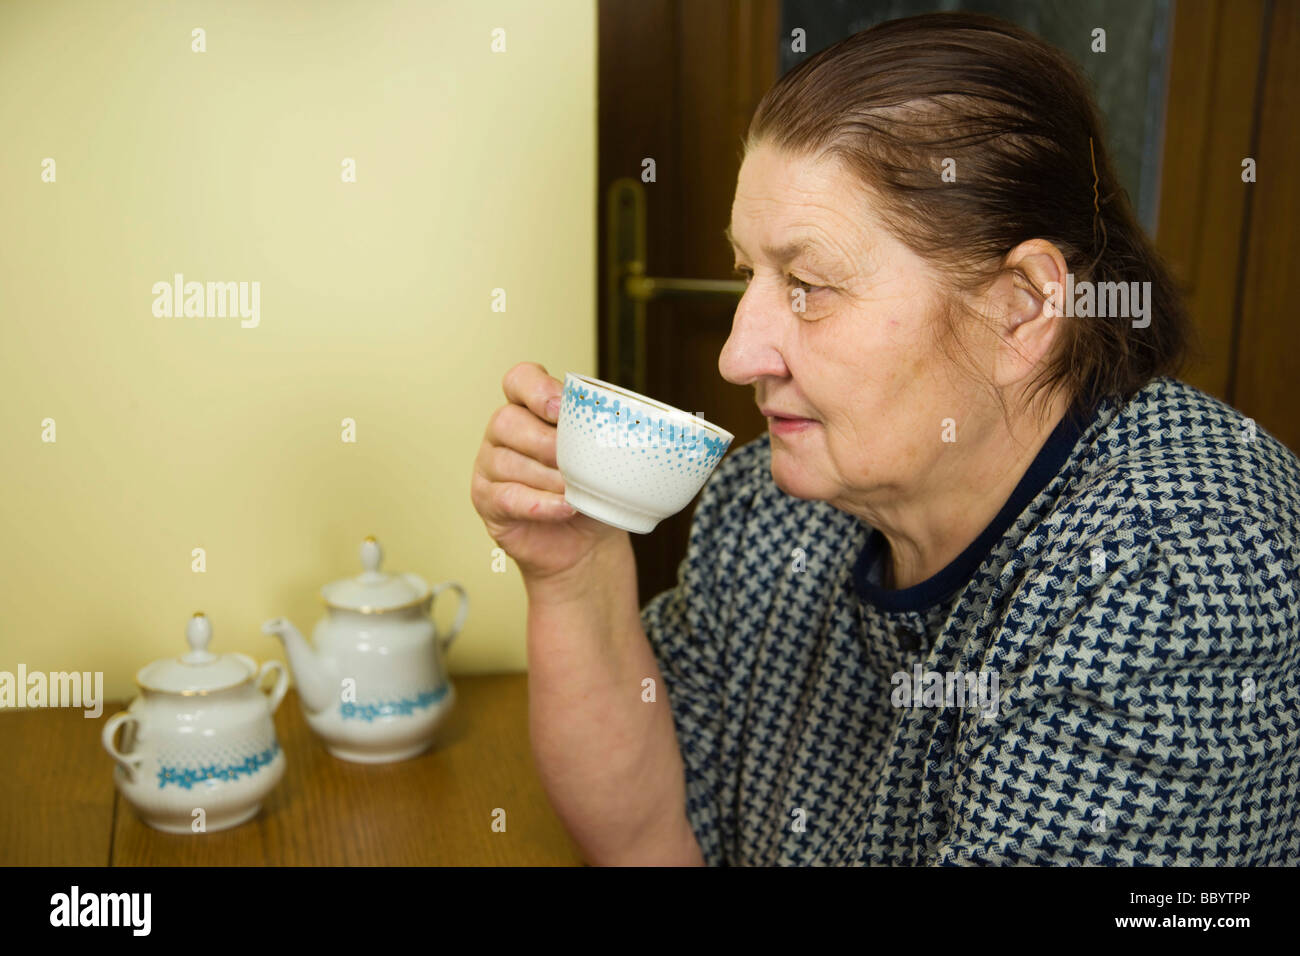 Woman, 67 years old, drinking tea in the kitchen Stock Photo